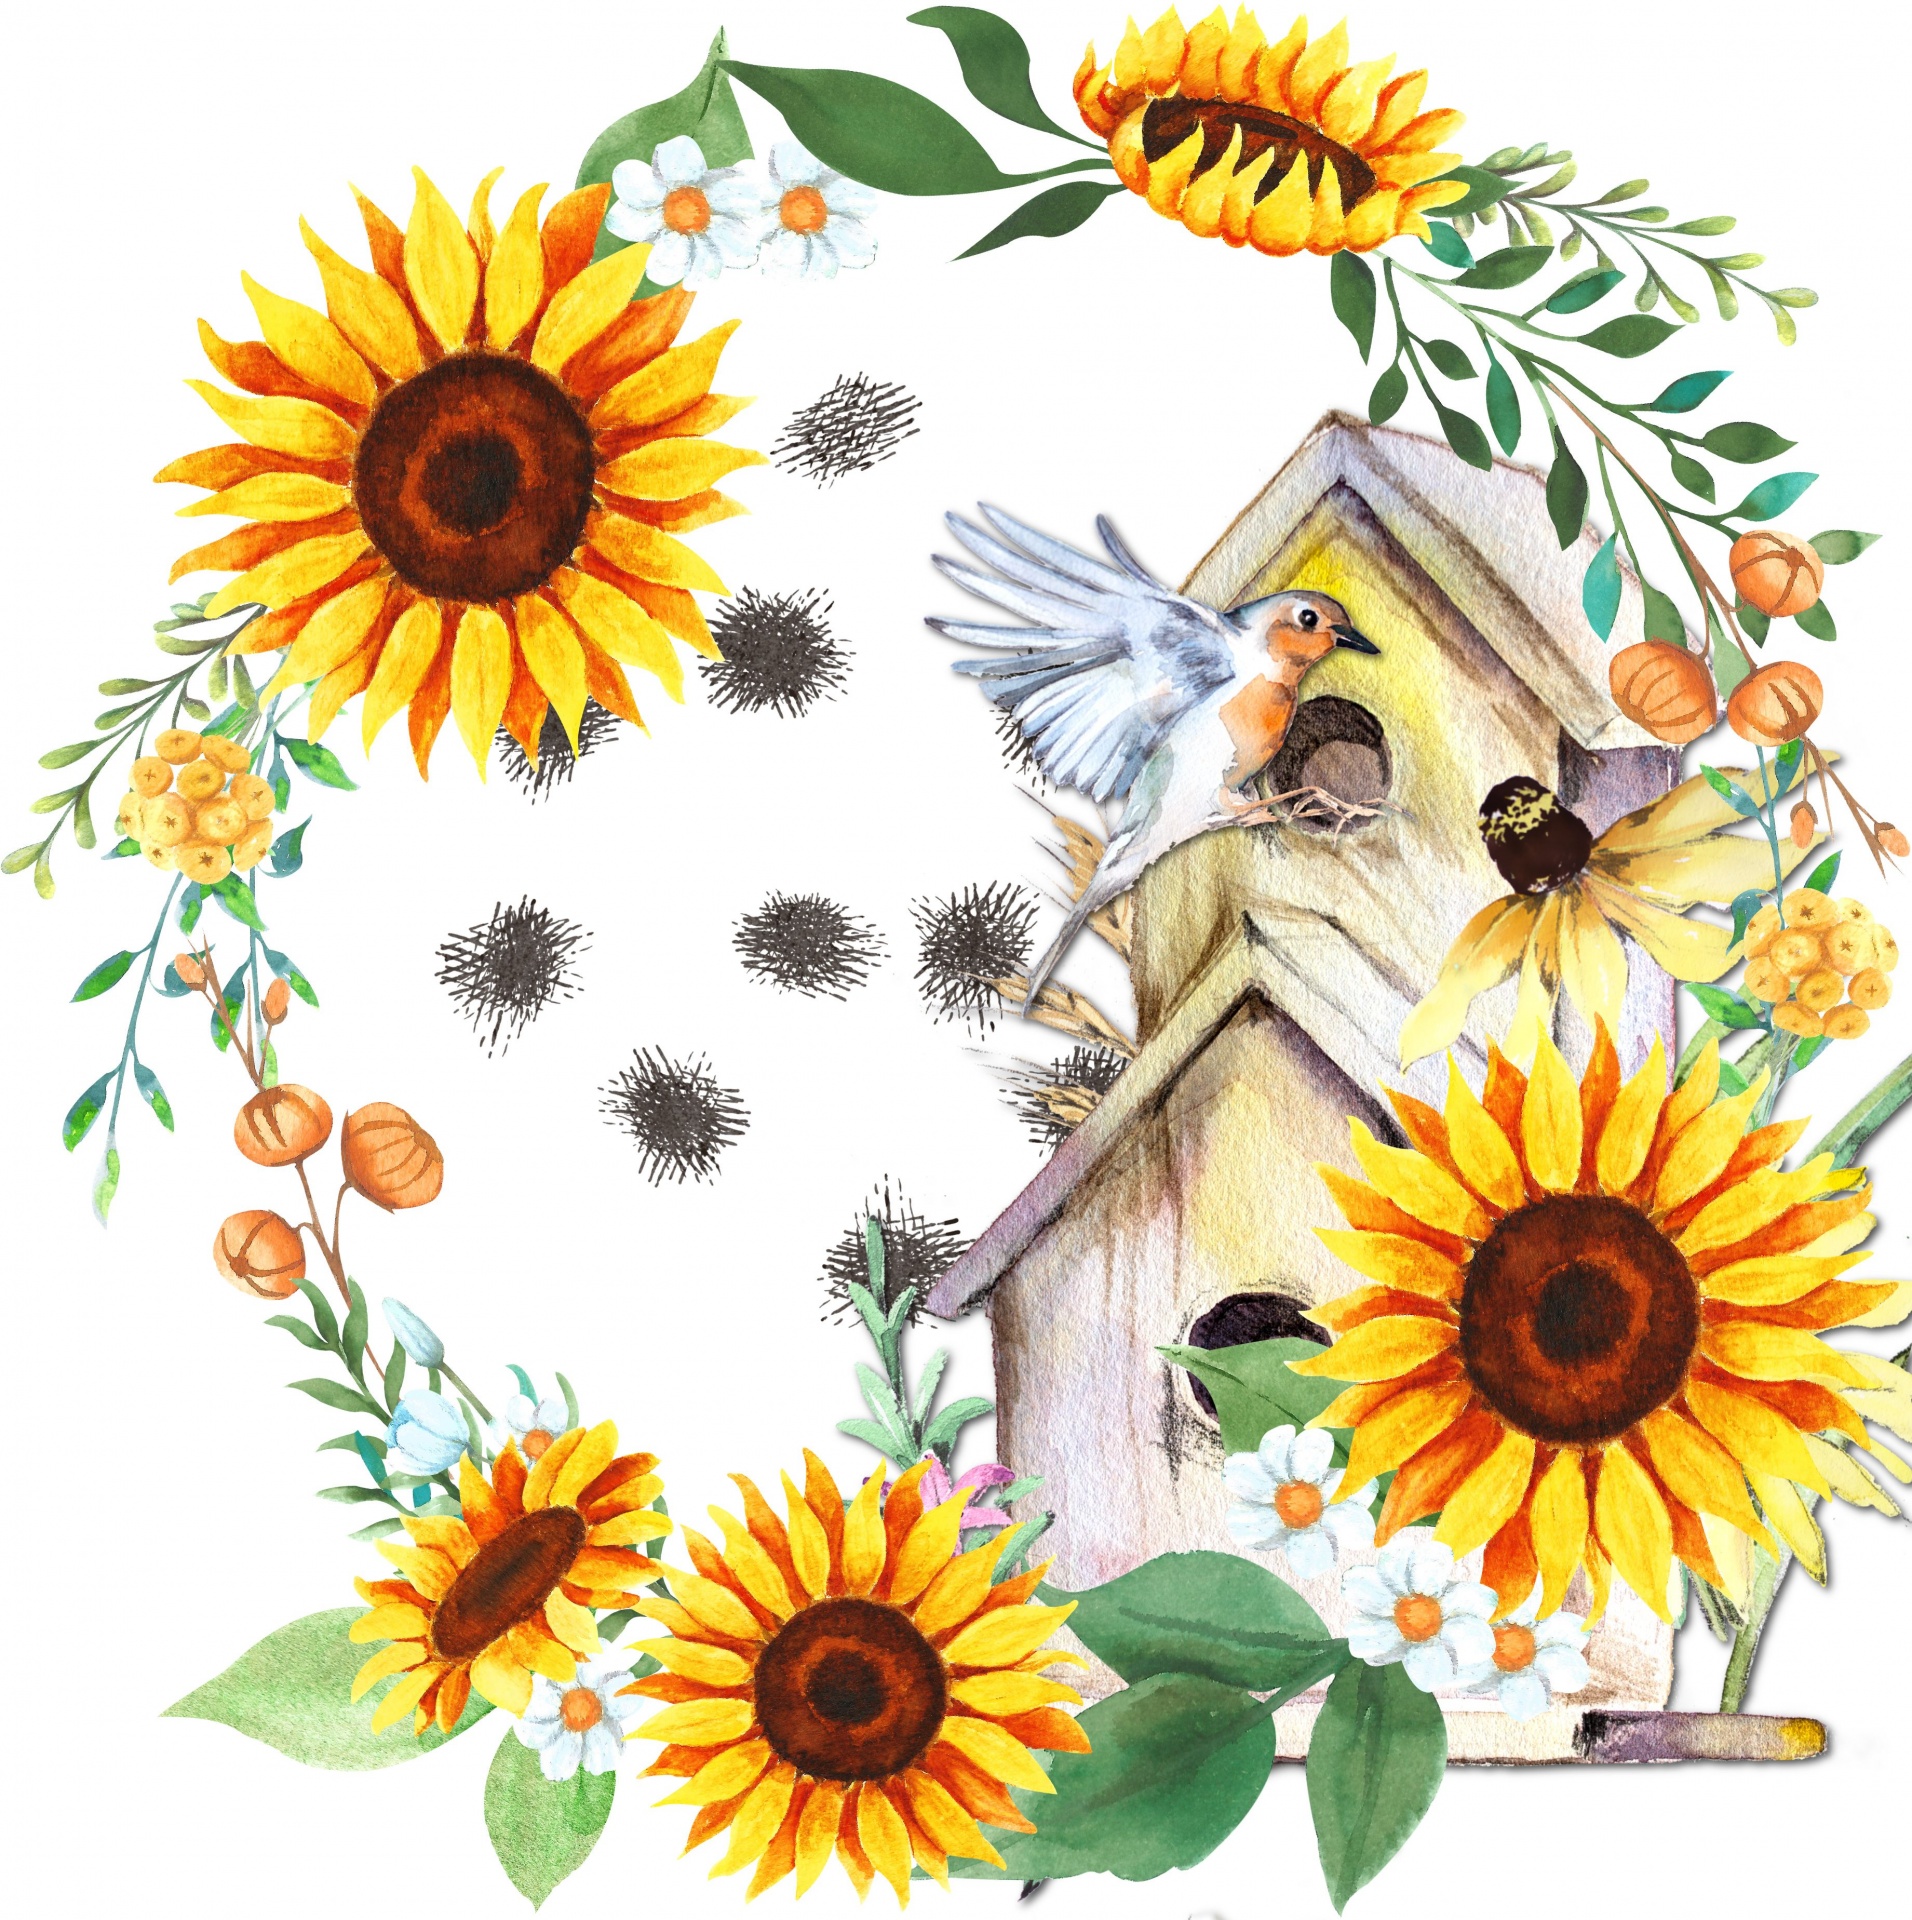 watercolor sunflower floral wreath with a bird approaching a bird house